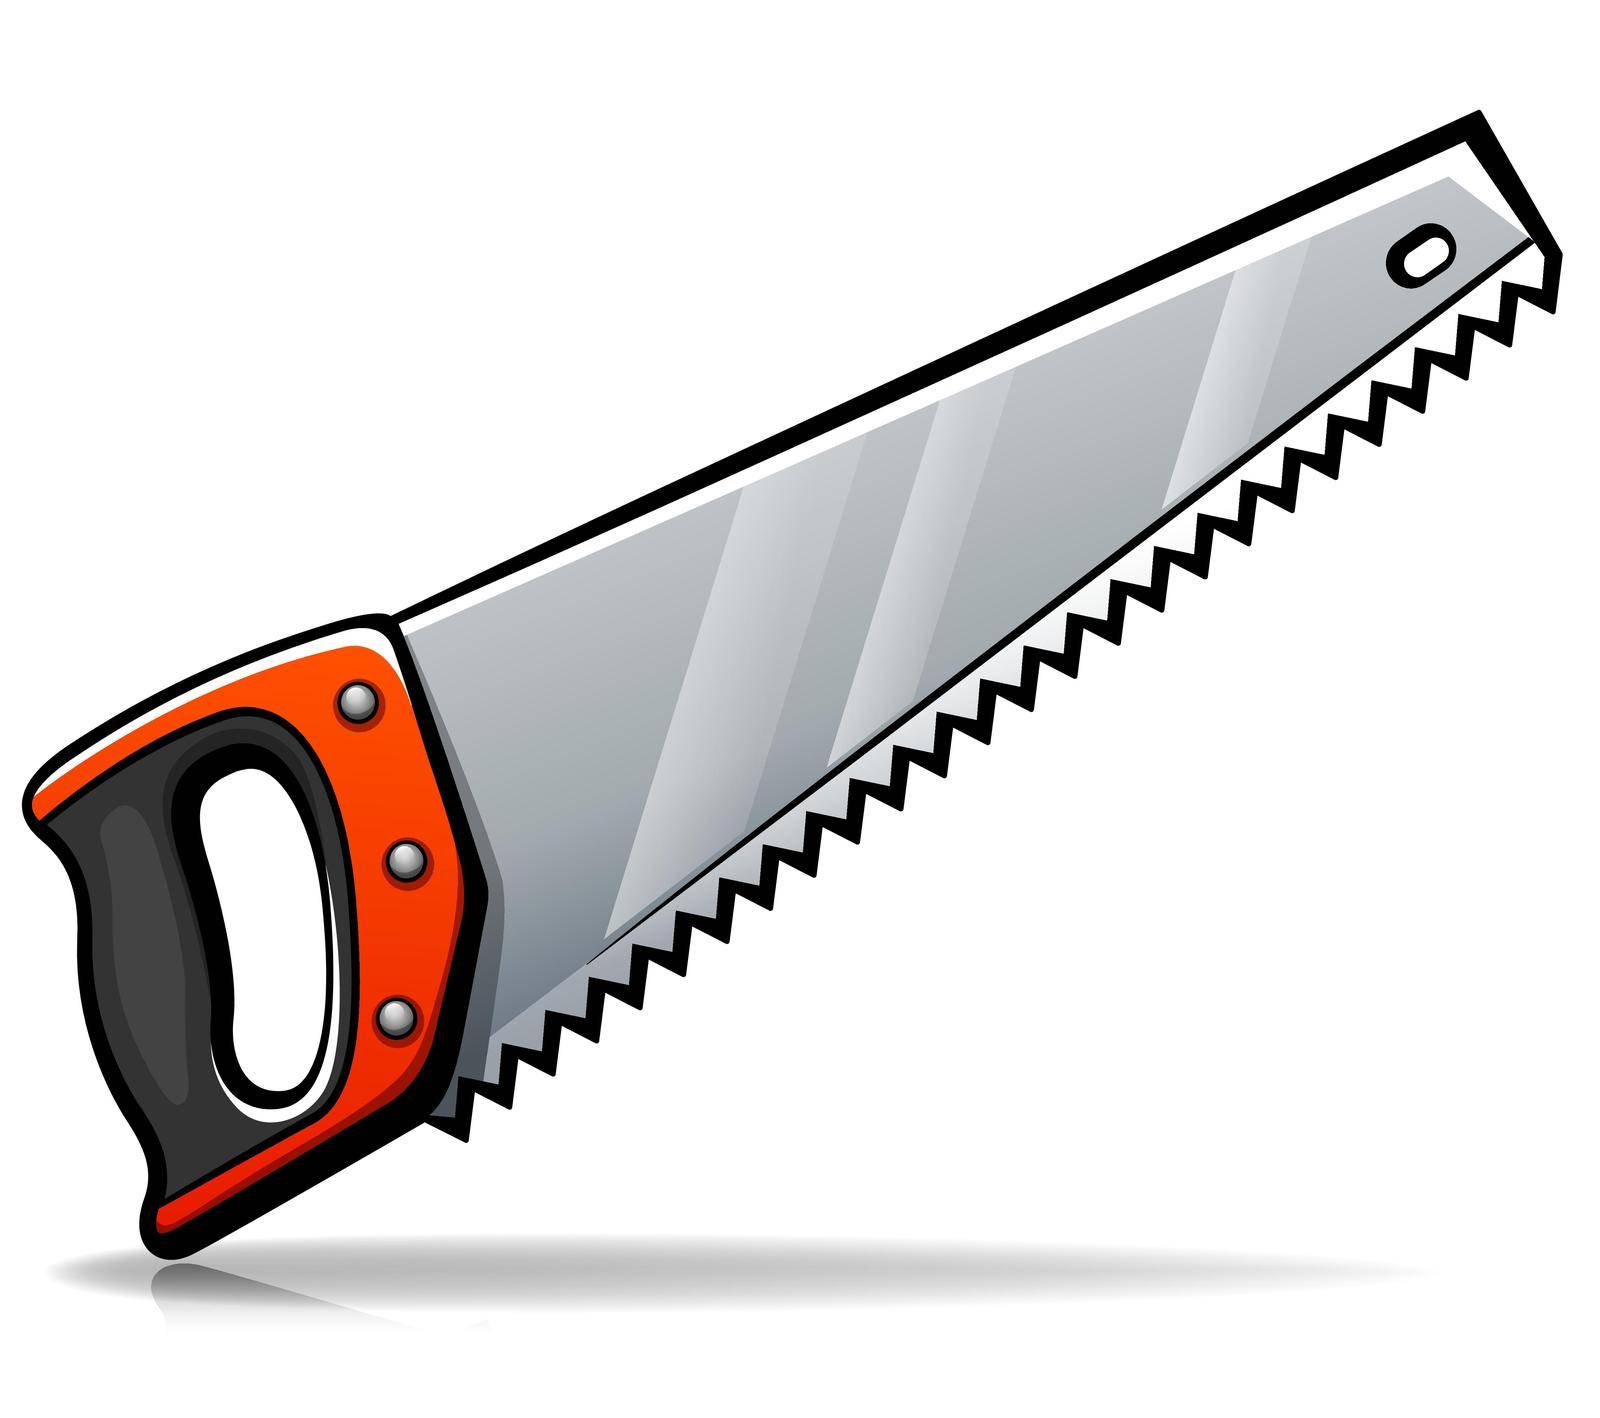 Vector illustration of hand saw cartoon isolated